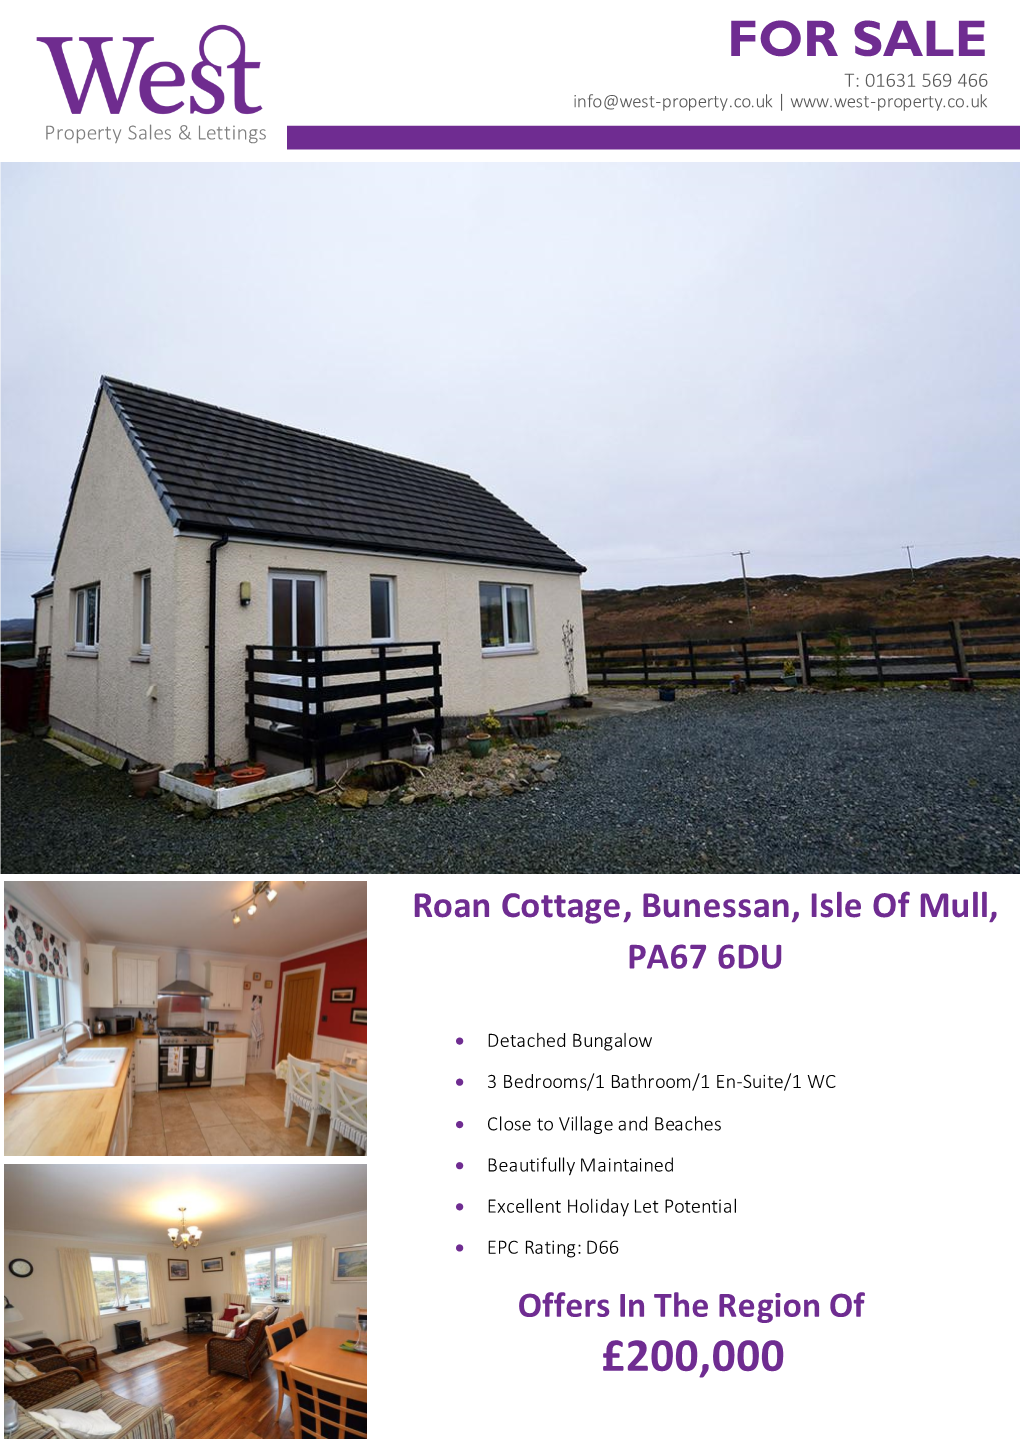 FOR SALE T: 01631 569 466 Info@West-Property.Co.Uk | Property Sales & Lettings